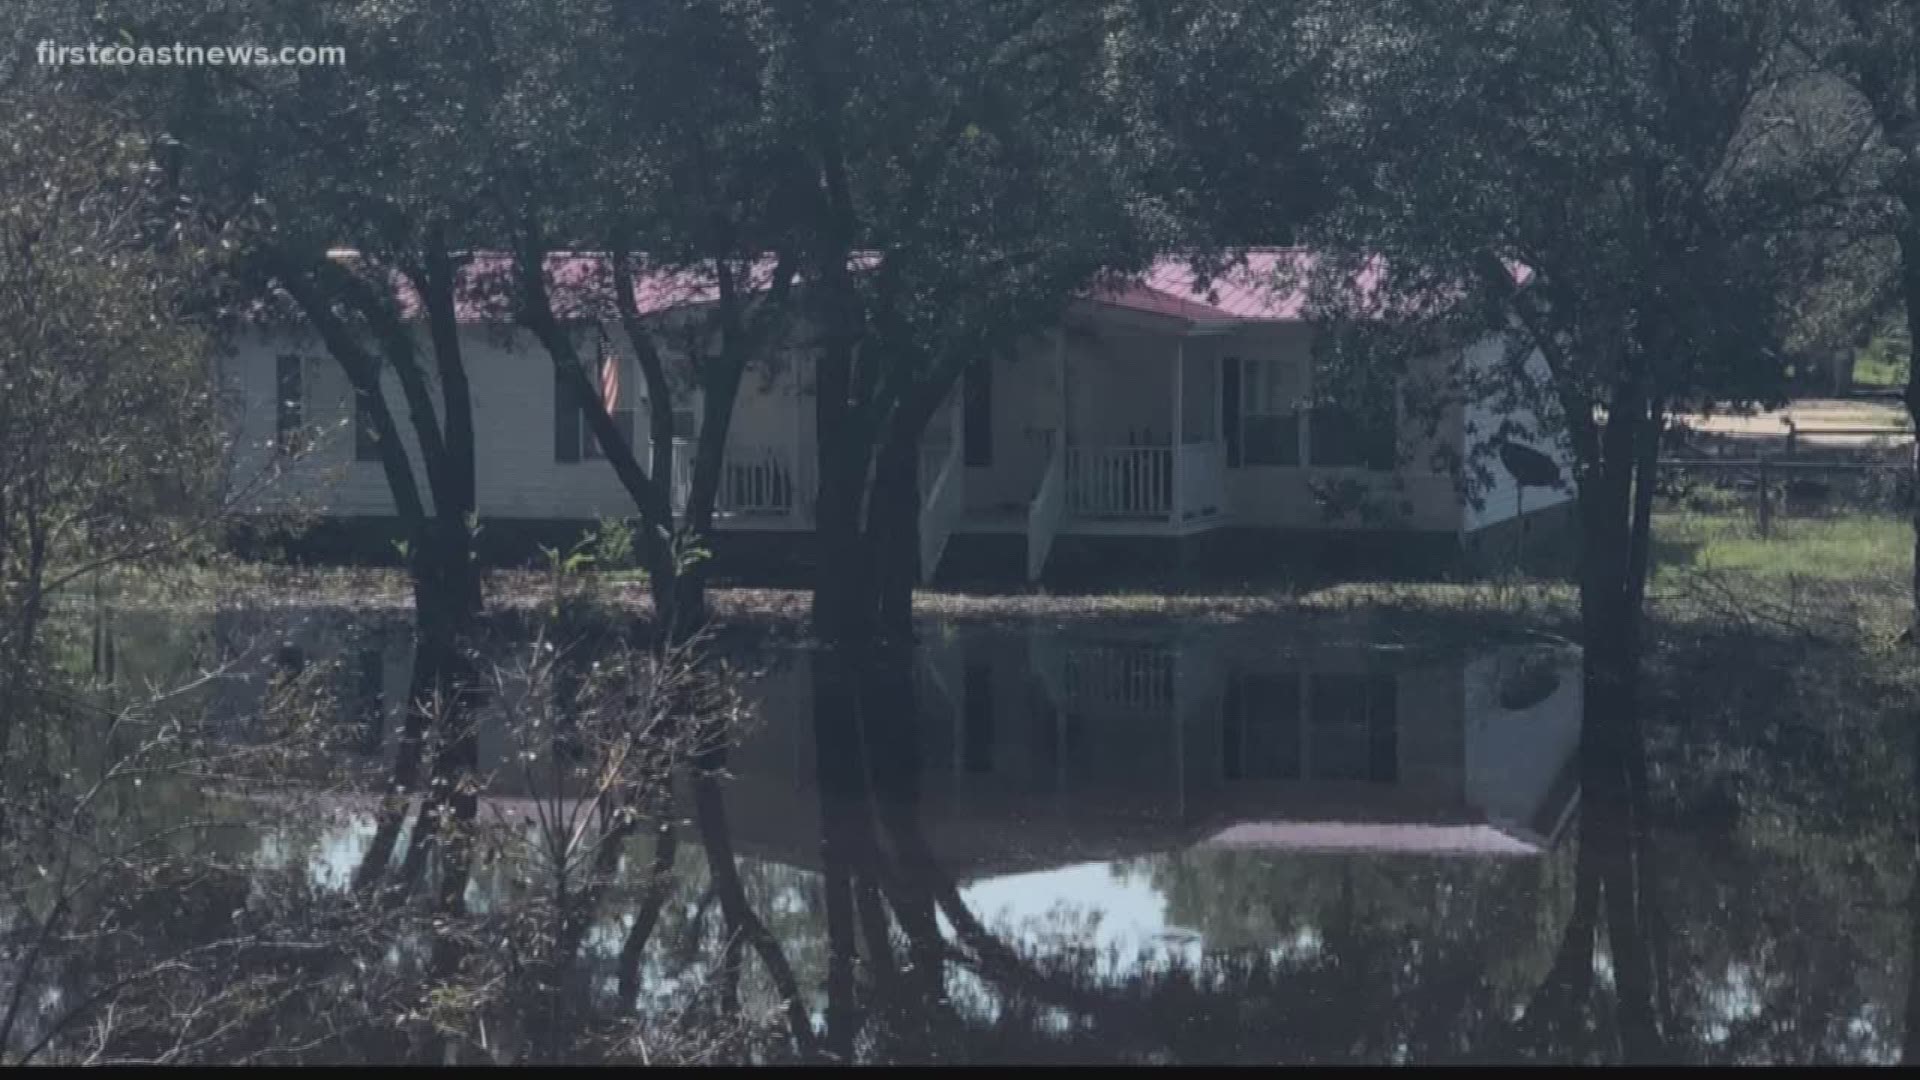 A First Coast man is back home after helping those inundated by floodwater in North Carolina.